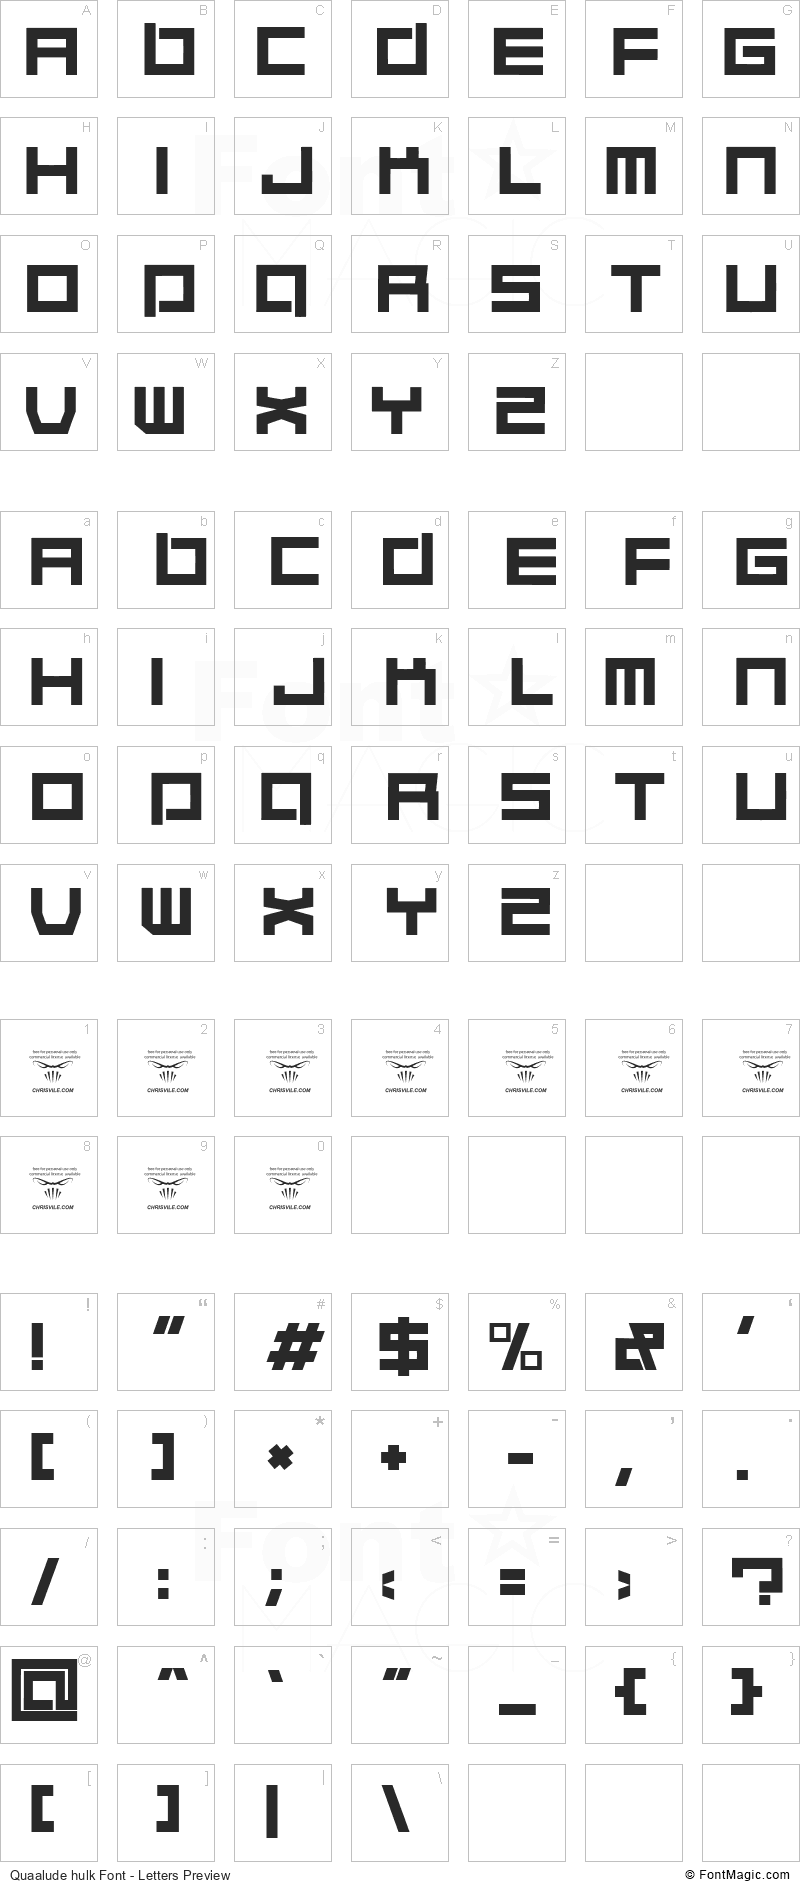 Quaalude hulk Font - All Latters Preview Chart